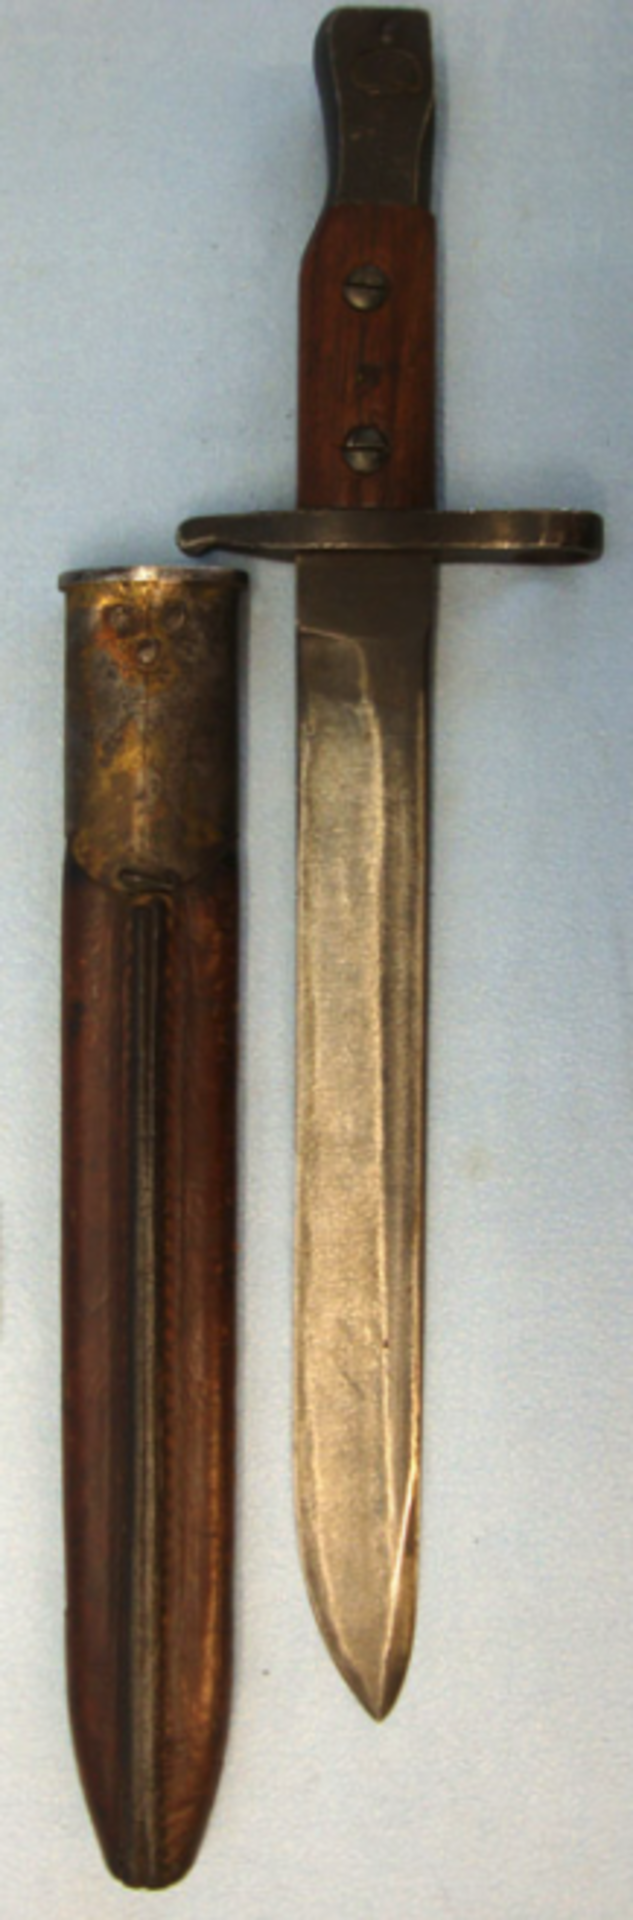 British Contract Ross Bayonet & 1915 Dated MK 1 Leather Scabbard. - Image 2 of 3